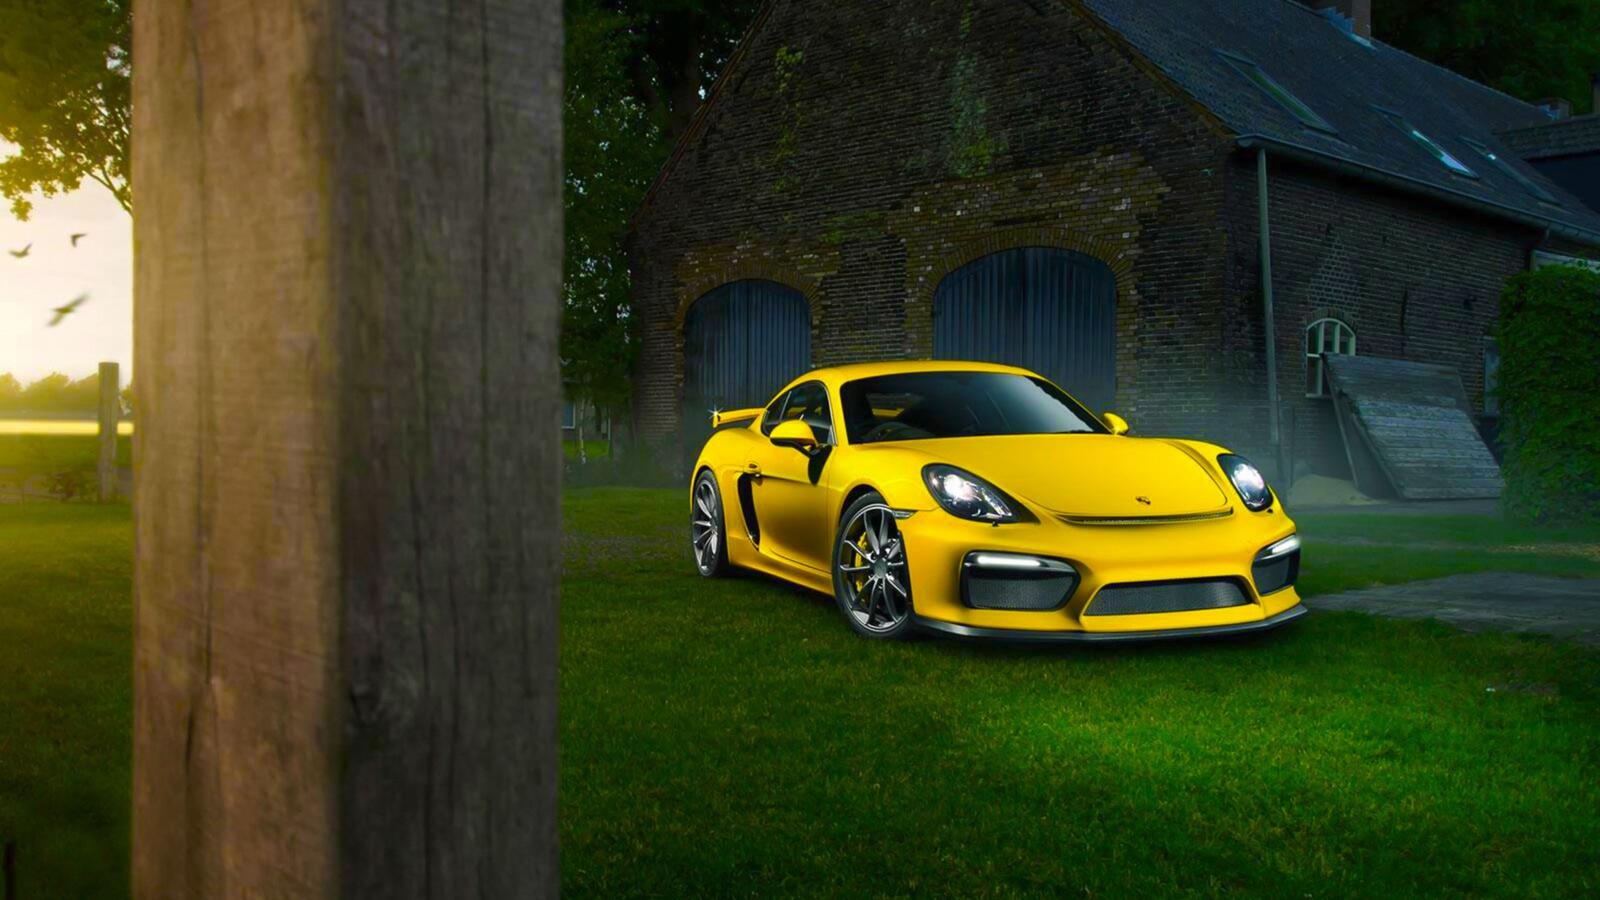 Free photo A yellow Porsche Cayman stands on a green lawn.